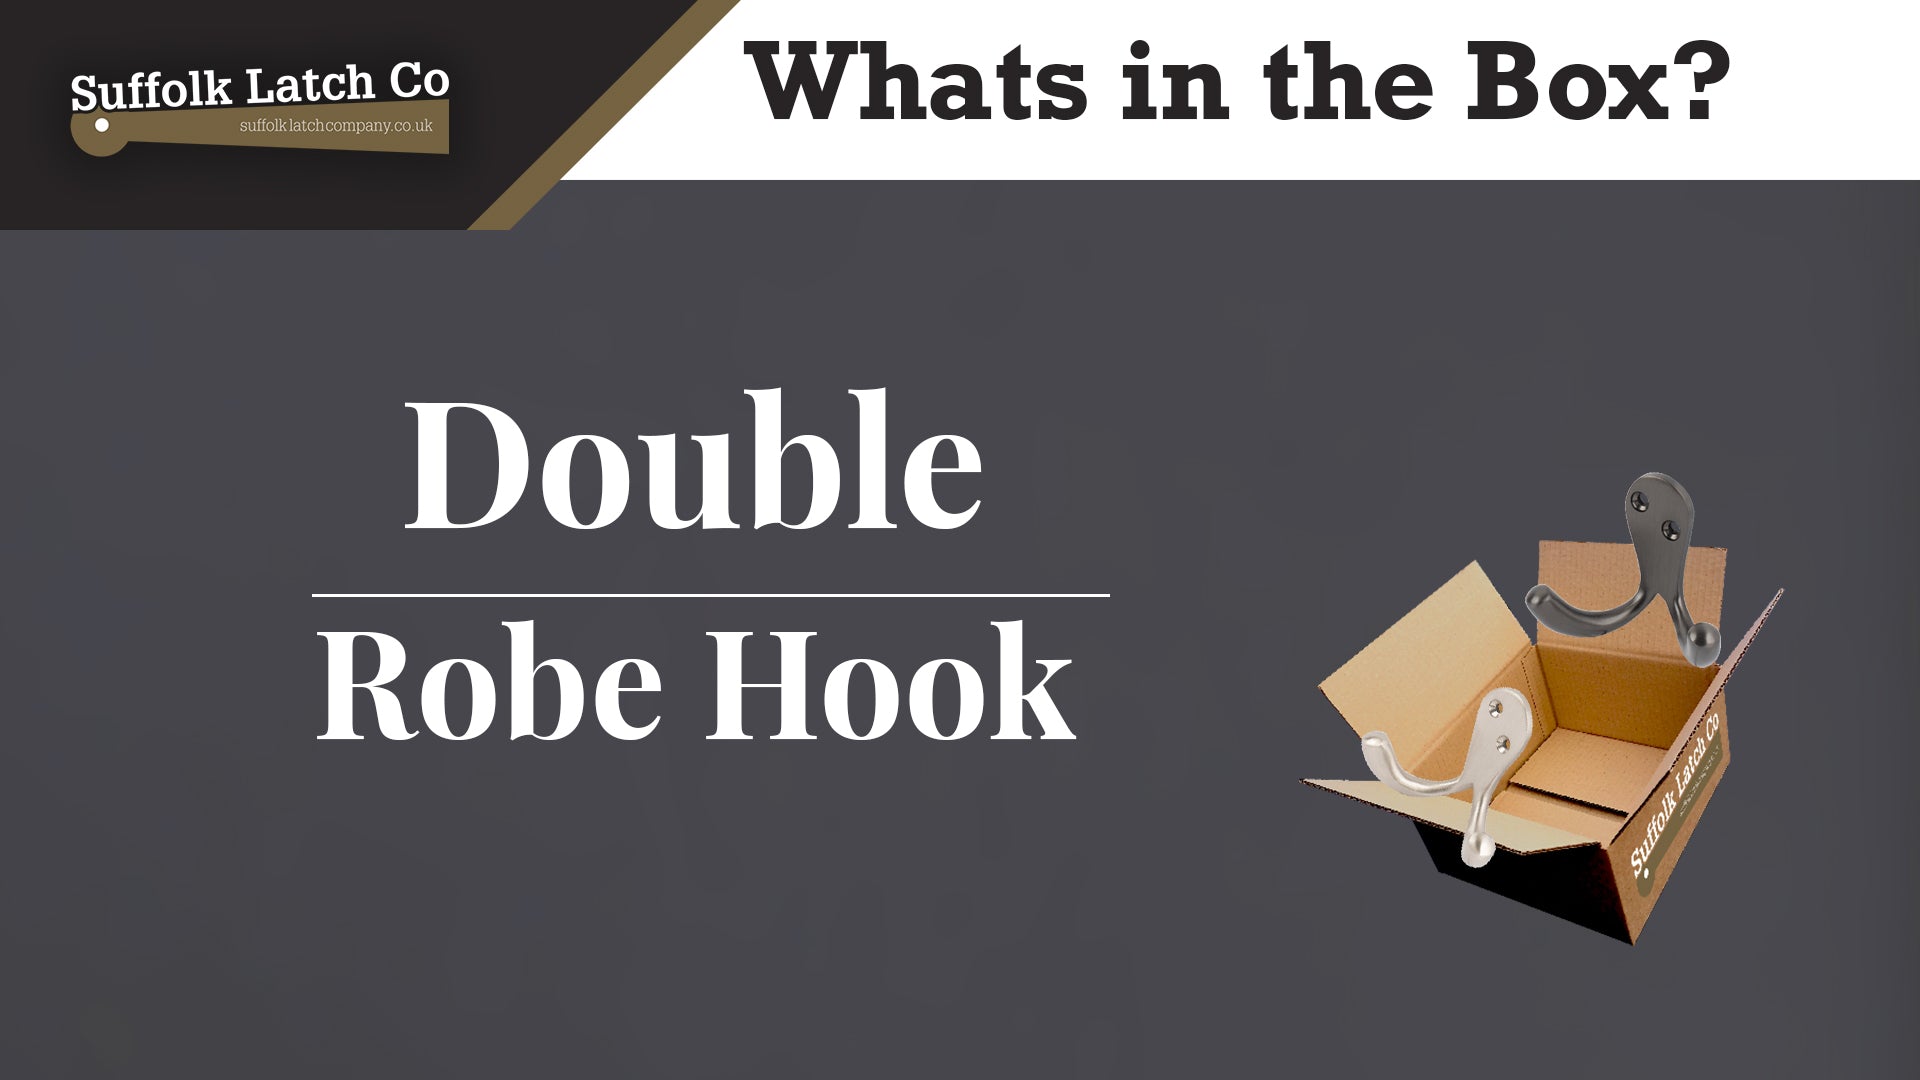 What's in the Box: Double Robe Hook